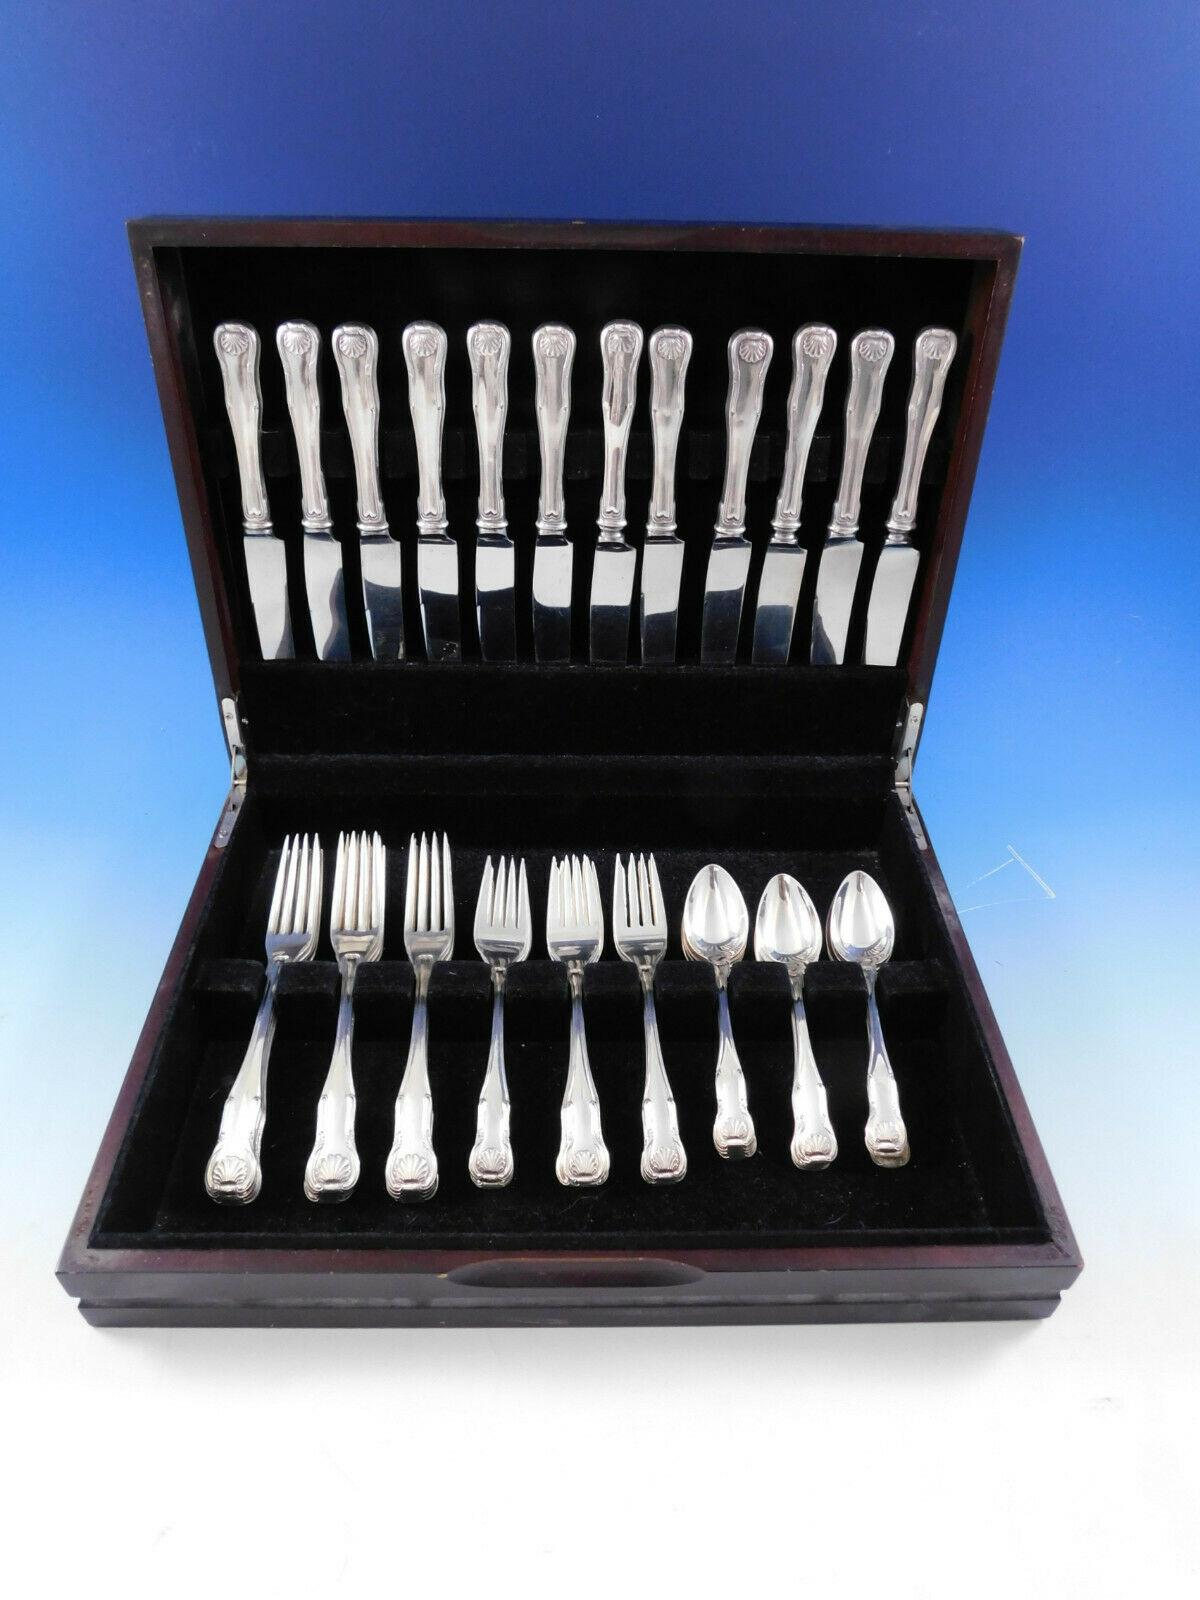 King by Kirk-Stieff sterling silver flatware set - 48 pieces. Kirk-Stieff''s version of the traditional Kings-style places its emphasis on simplicity of design, and features an iconic shell motif. This set includes:

12 knives, 8 7/8